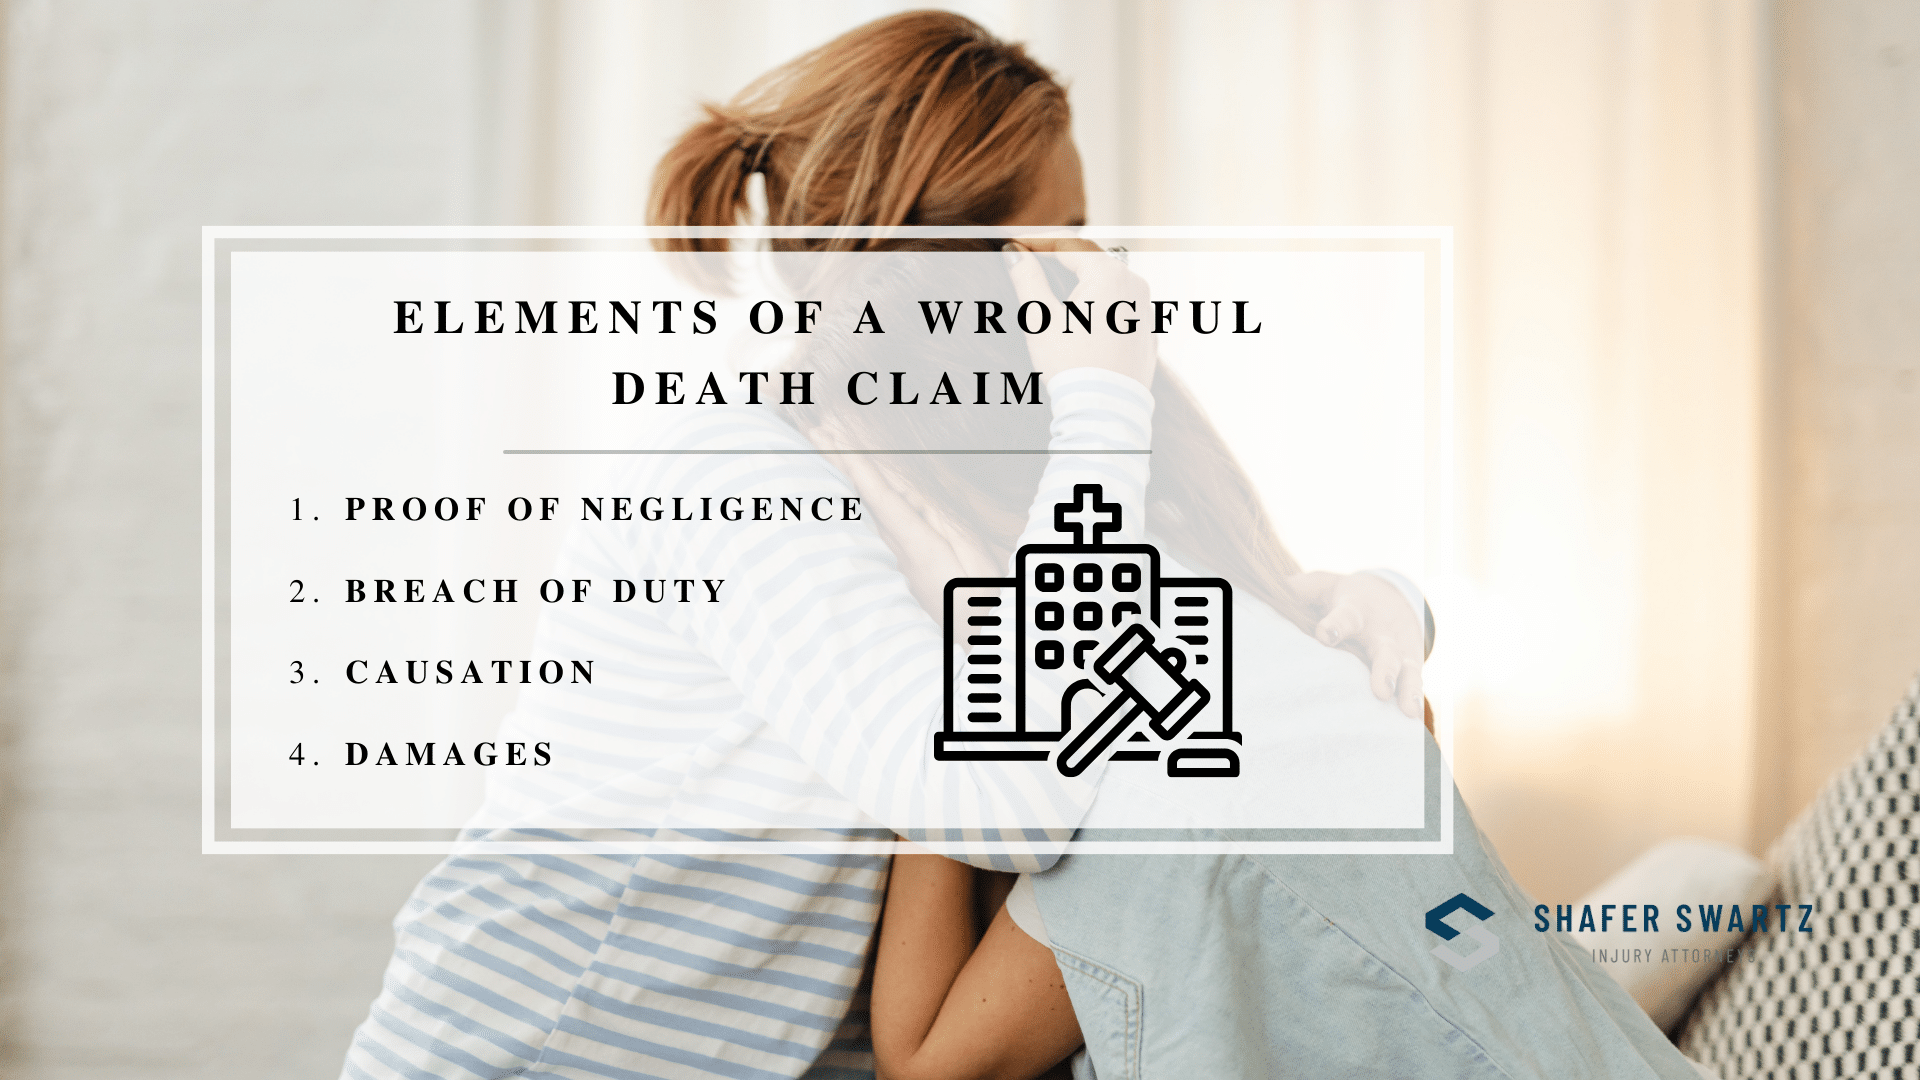 Infographic image of elements of a wrongful death claim